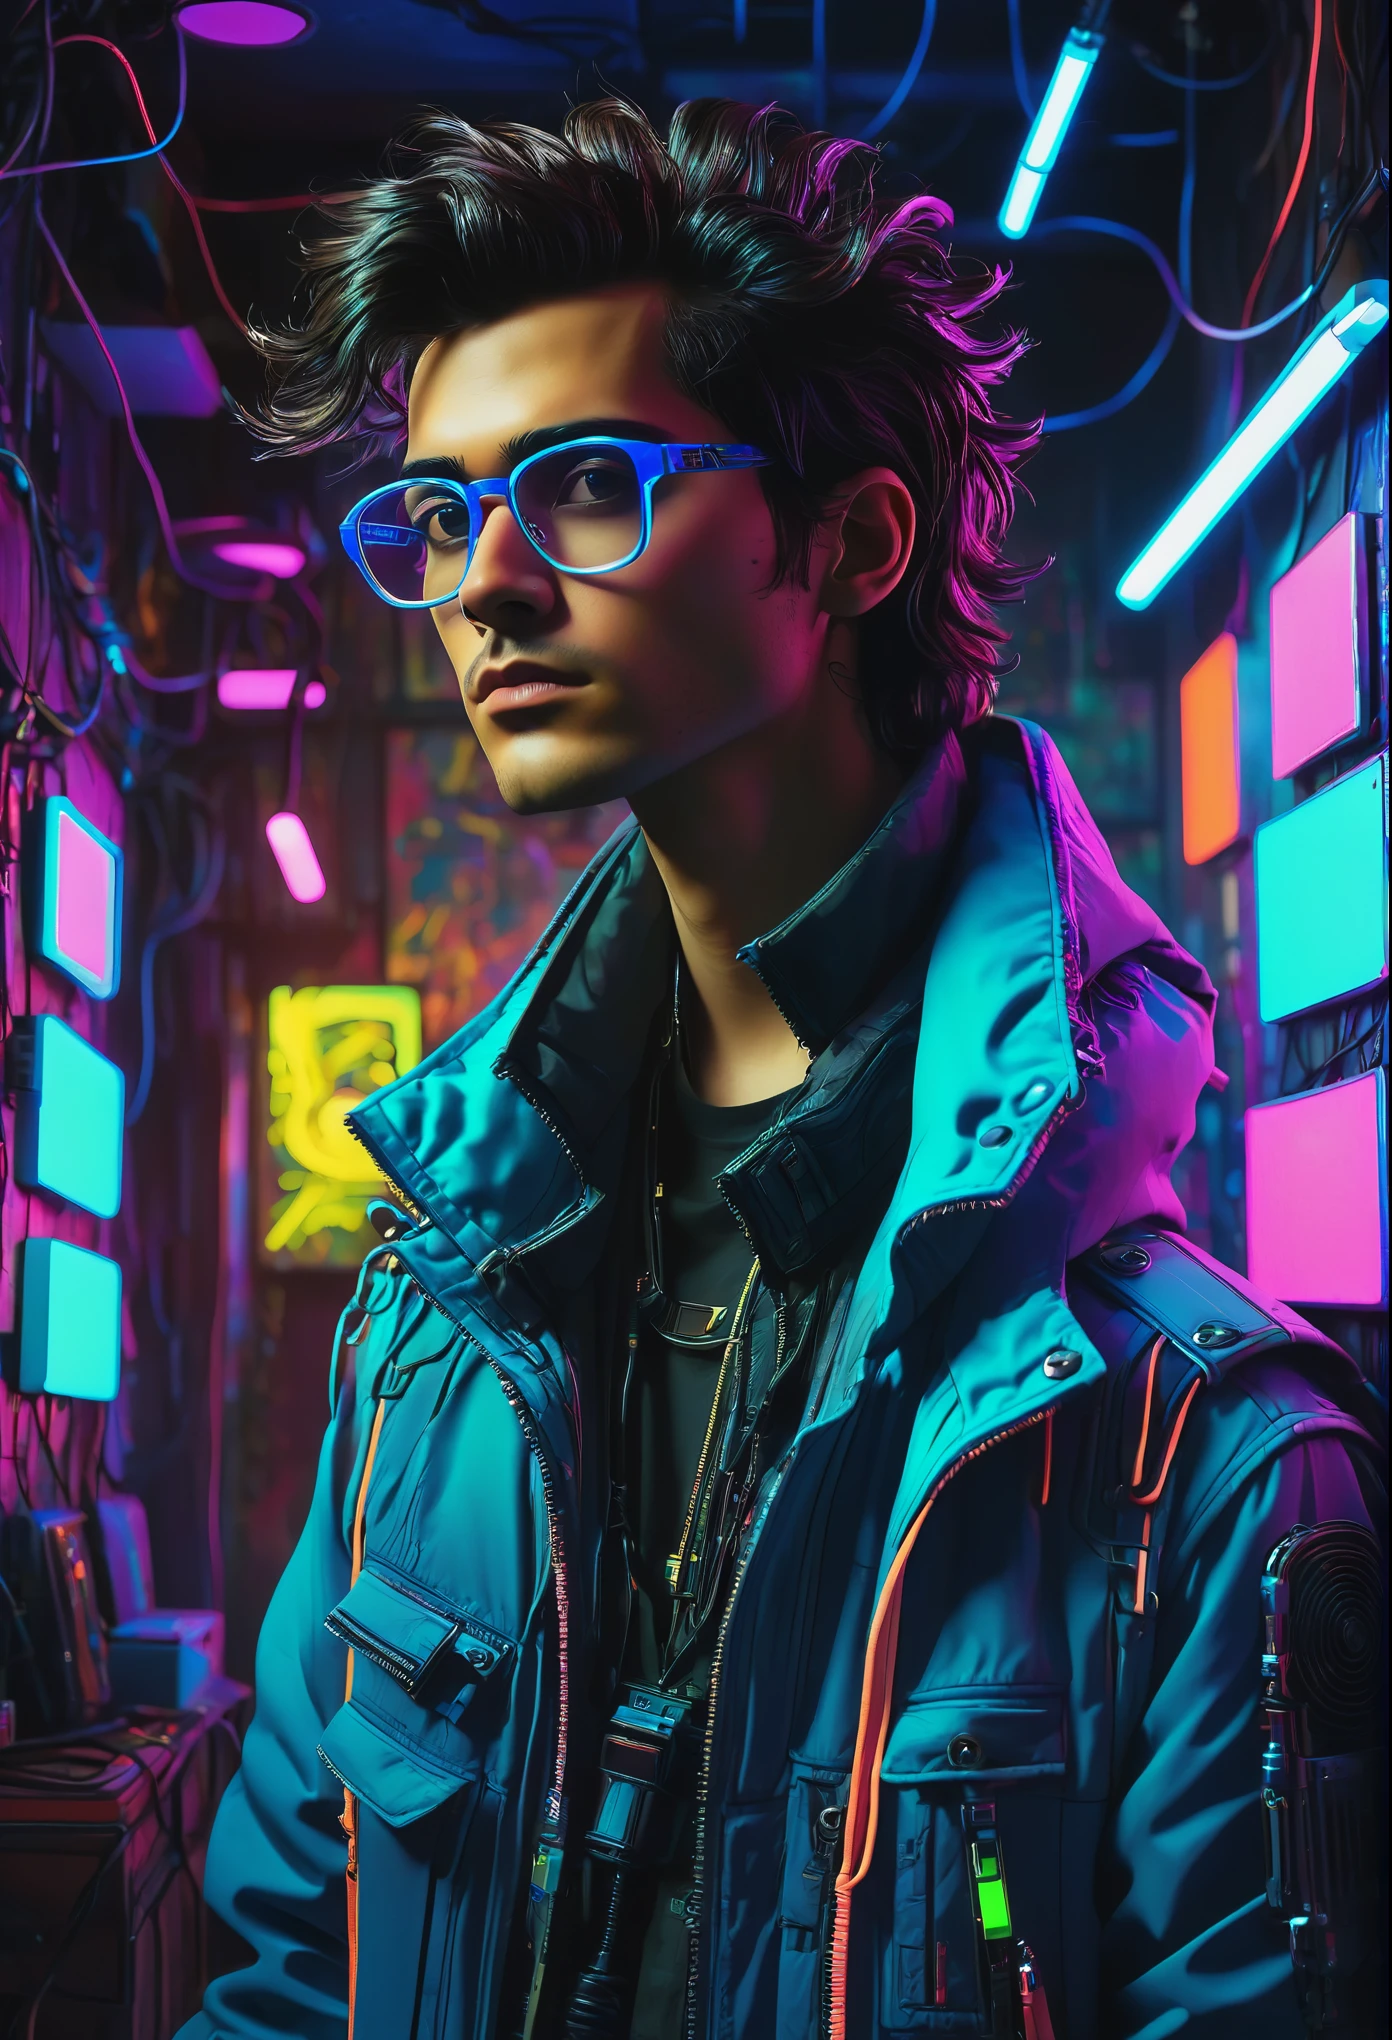 well-lit room with a very slim young man with glasses, and messy straight dark brown hair wearing a blue jacket and a neon light, in a cyberpunk themed room, colores vibrantes ciberpunk, Como un taller cyberpunk, beeple style hybrid mix, color estilo ciberpunk, en estilo ciberpunk, 80s airbrush aesthetic, dreamy colorful cyberpunk colors, colores del pitido, cyberpunk with neon lights, disco pictoplasma